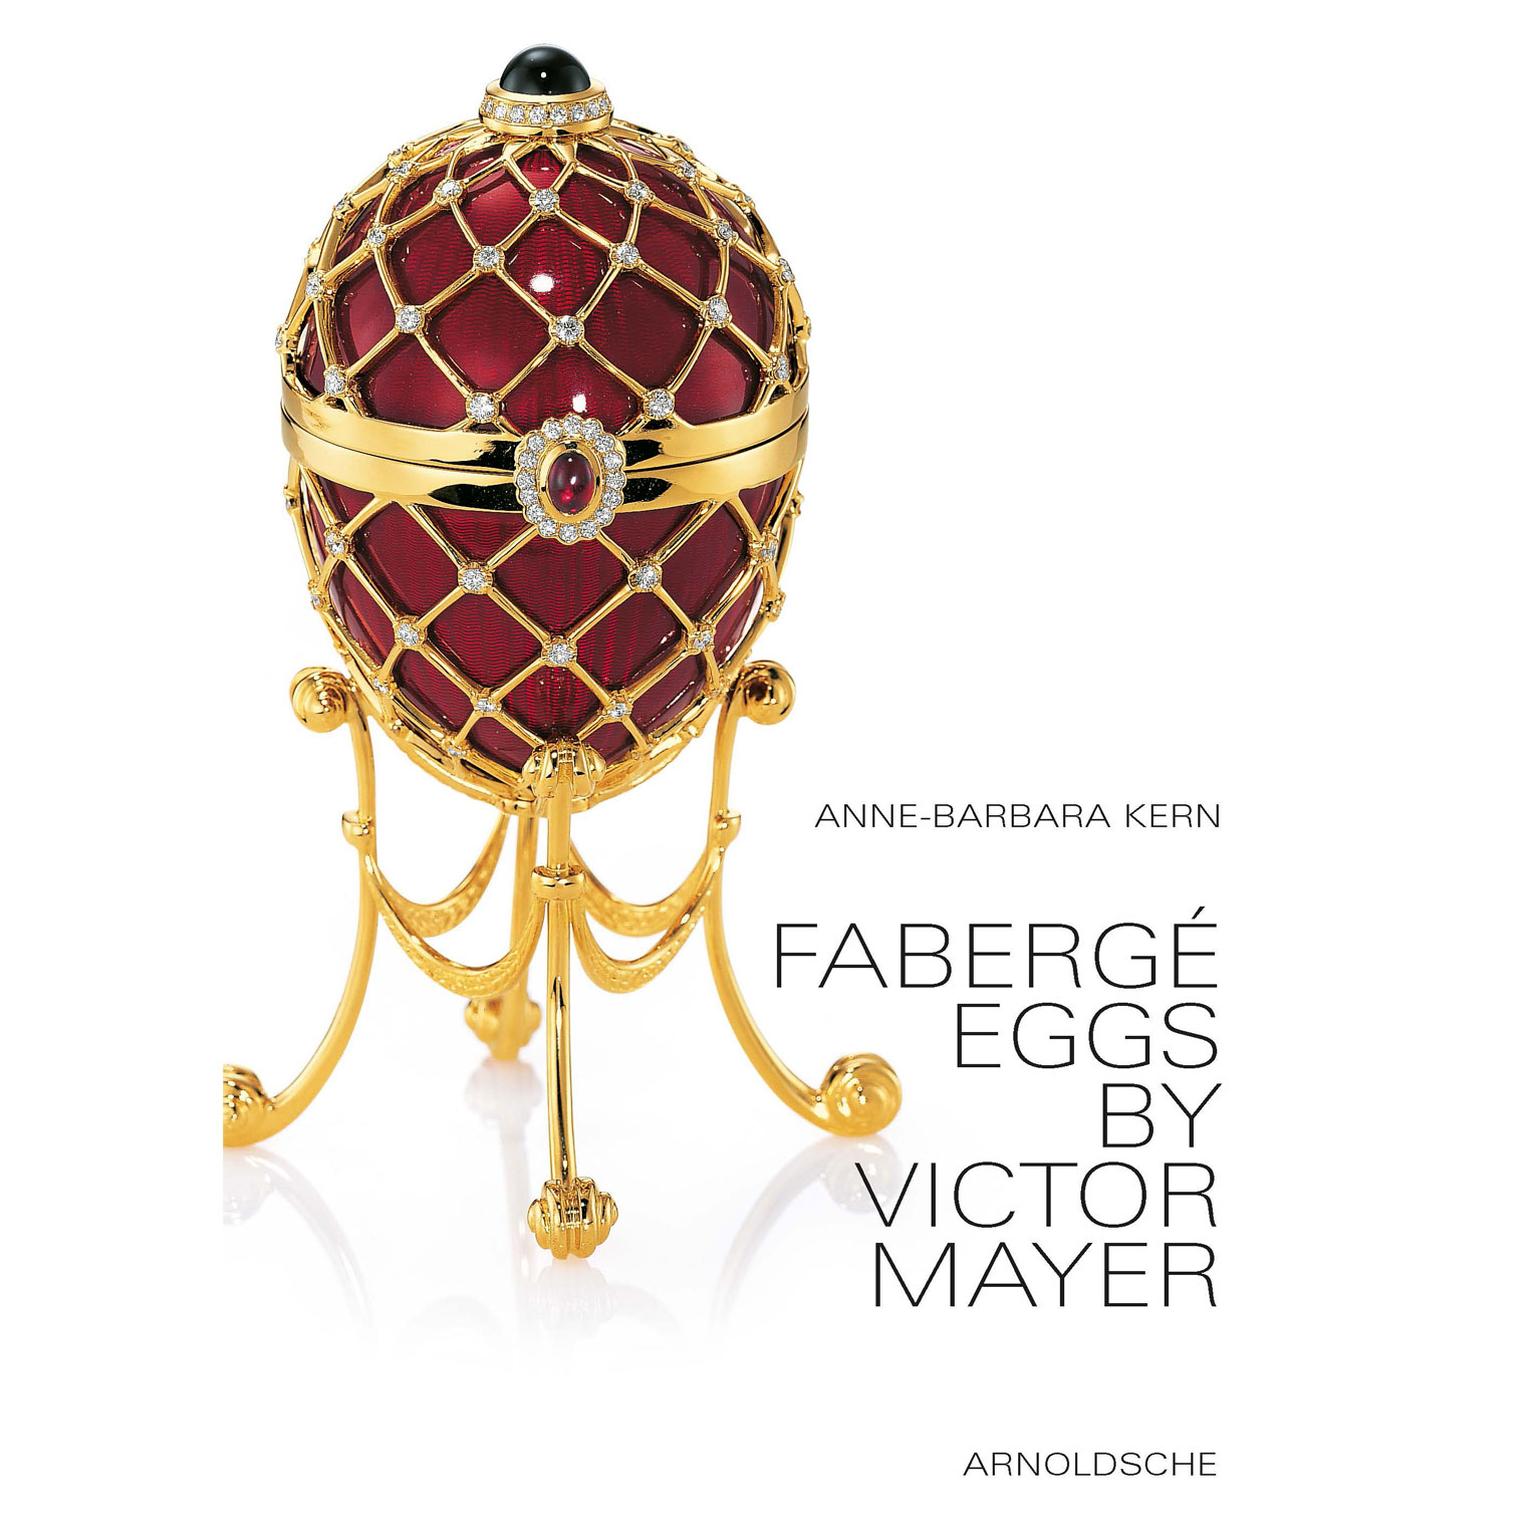 Fabergé Eggs by Victor Mayer, Anne-Barbara Kern